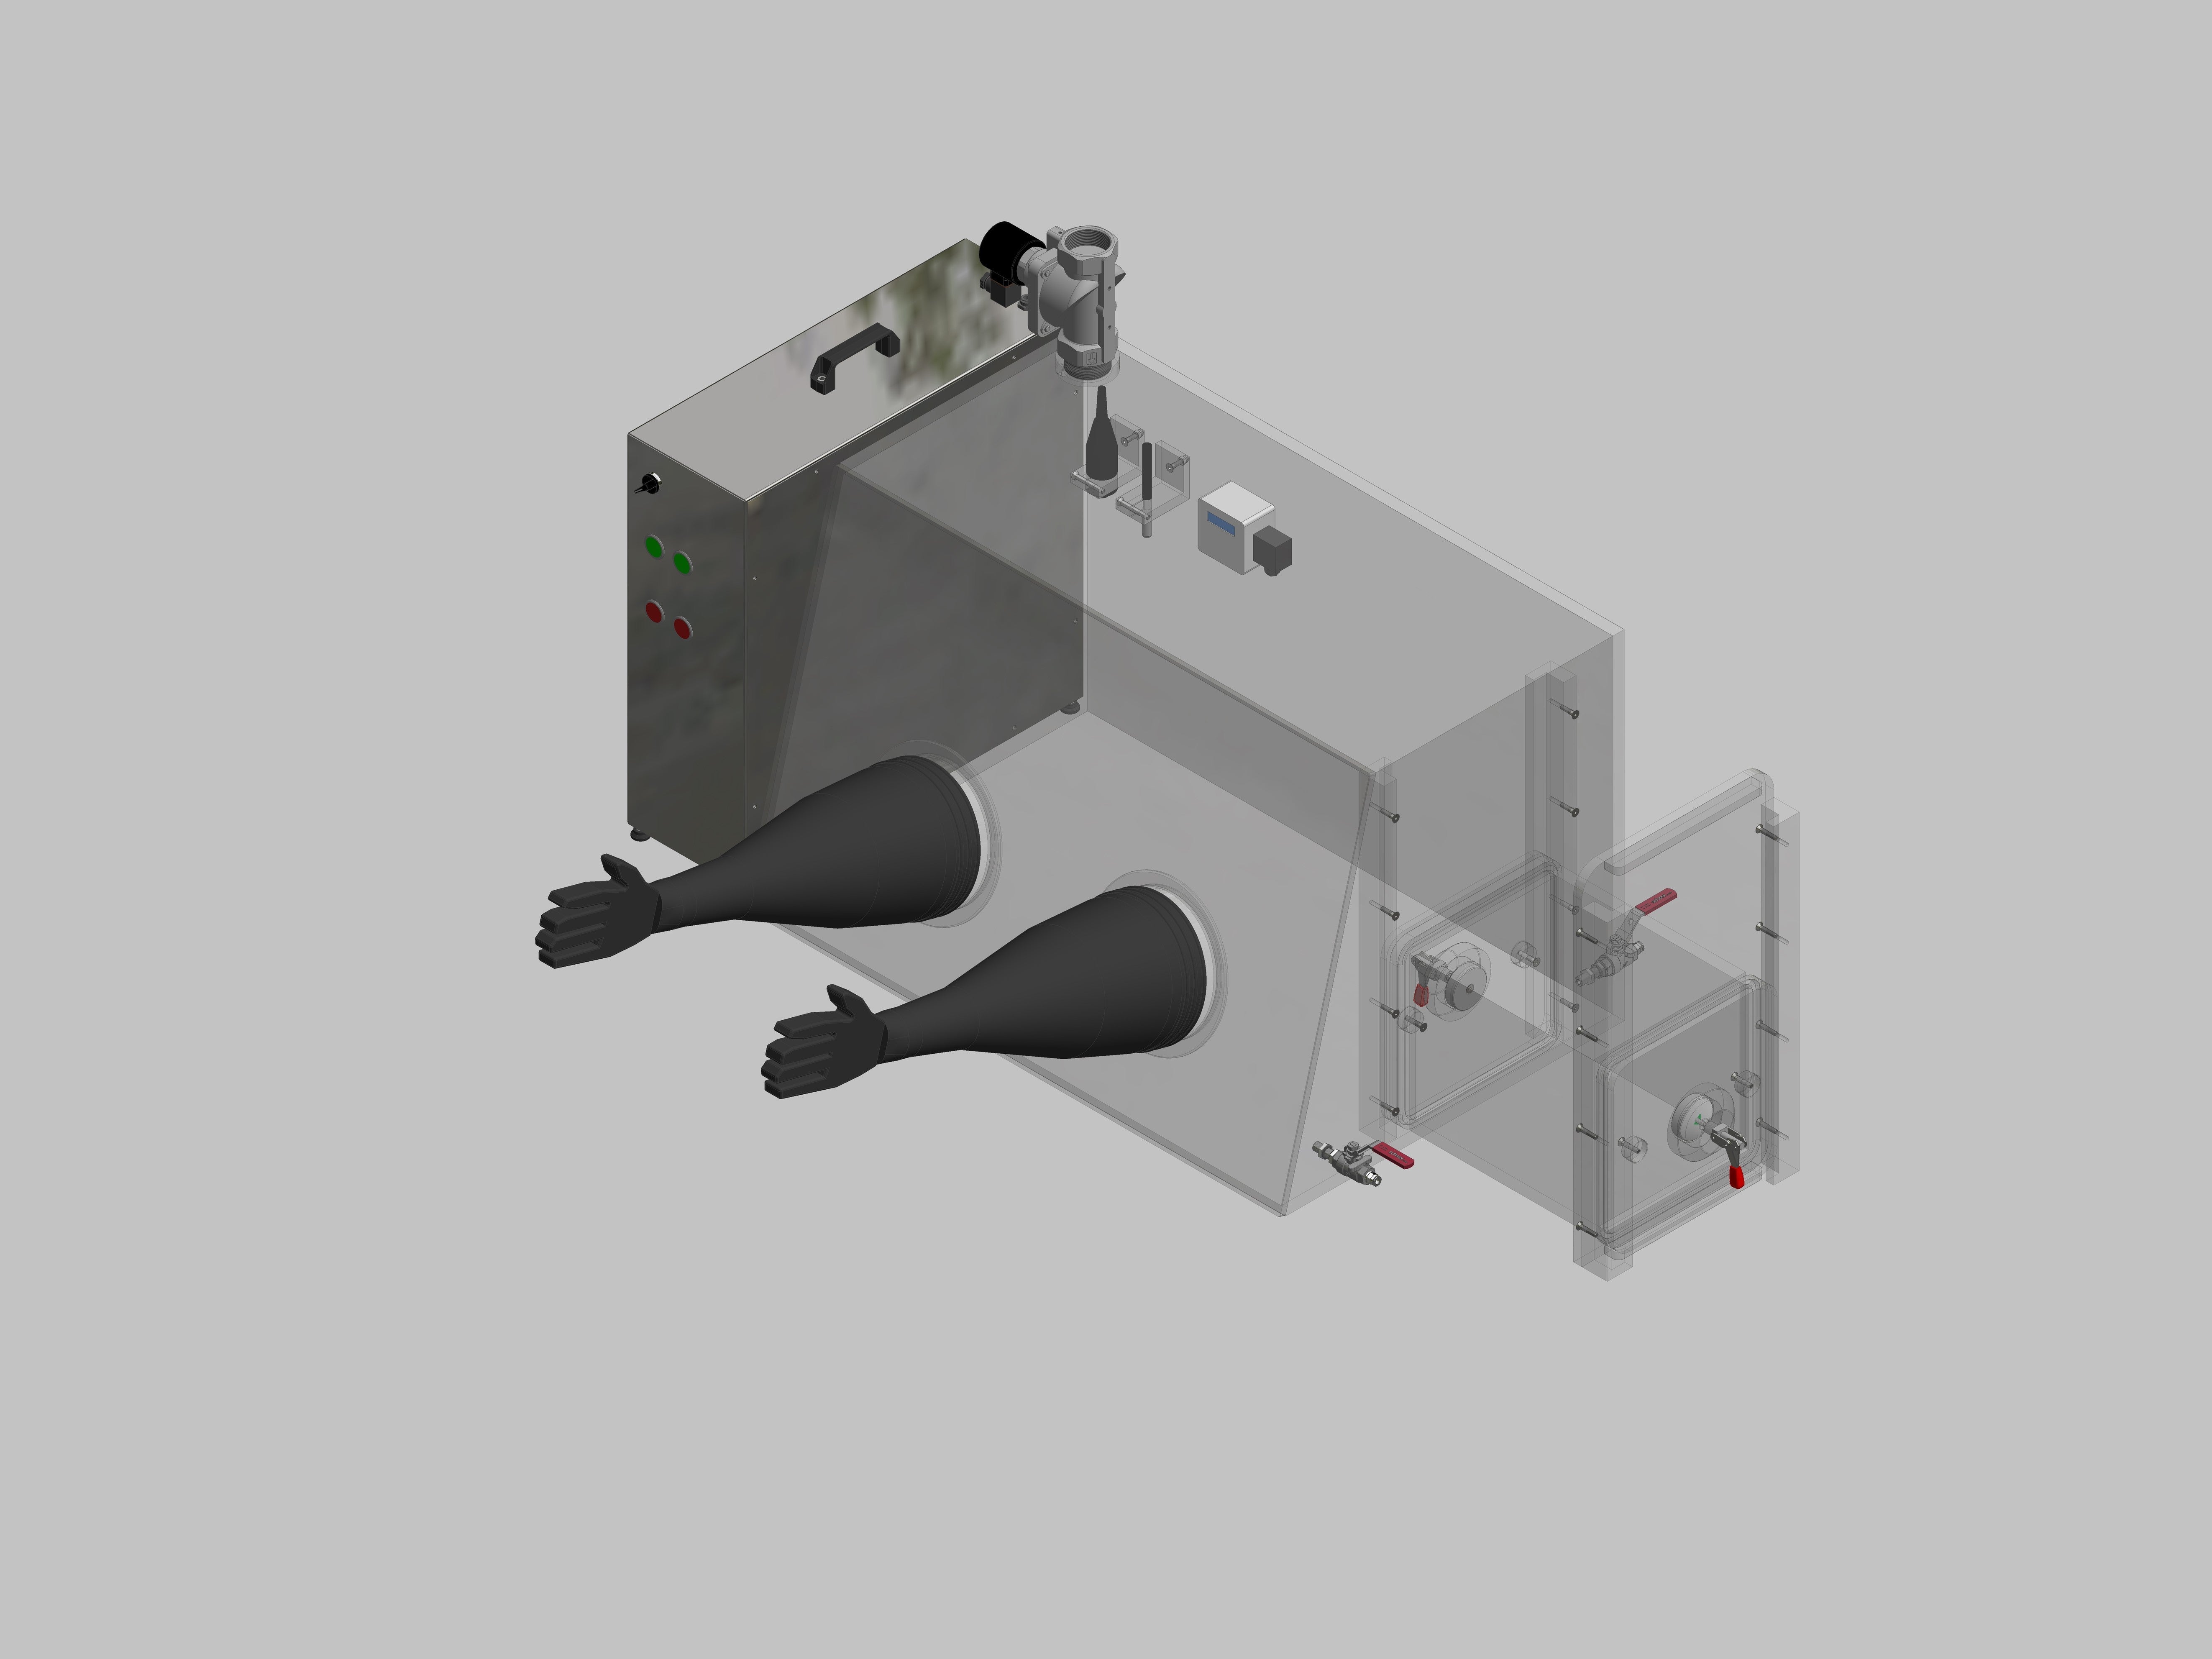 Glovebox made of acrylic&gt; Gas filling: automatic flushing with pressure control, front version: standard, side version: rectangular lock control: oxygen and humidity regulator